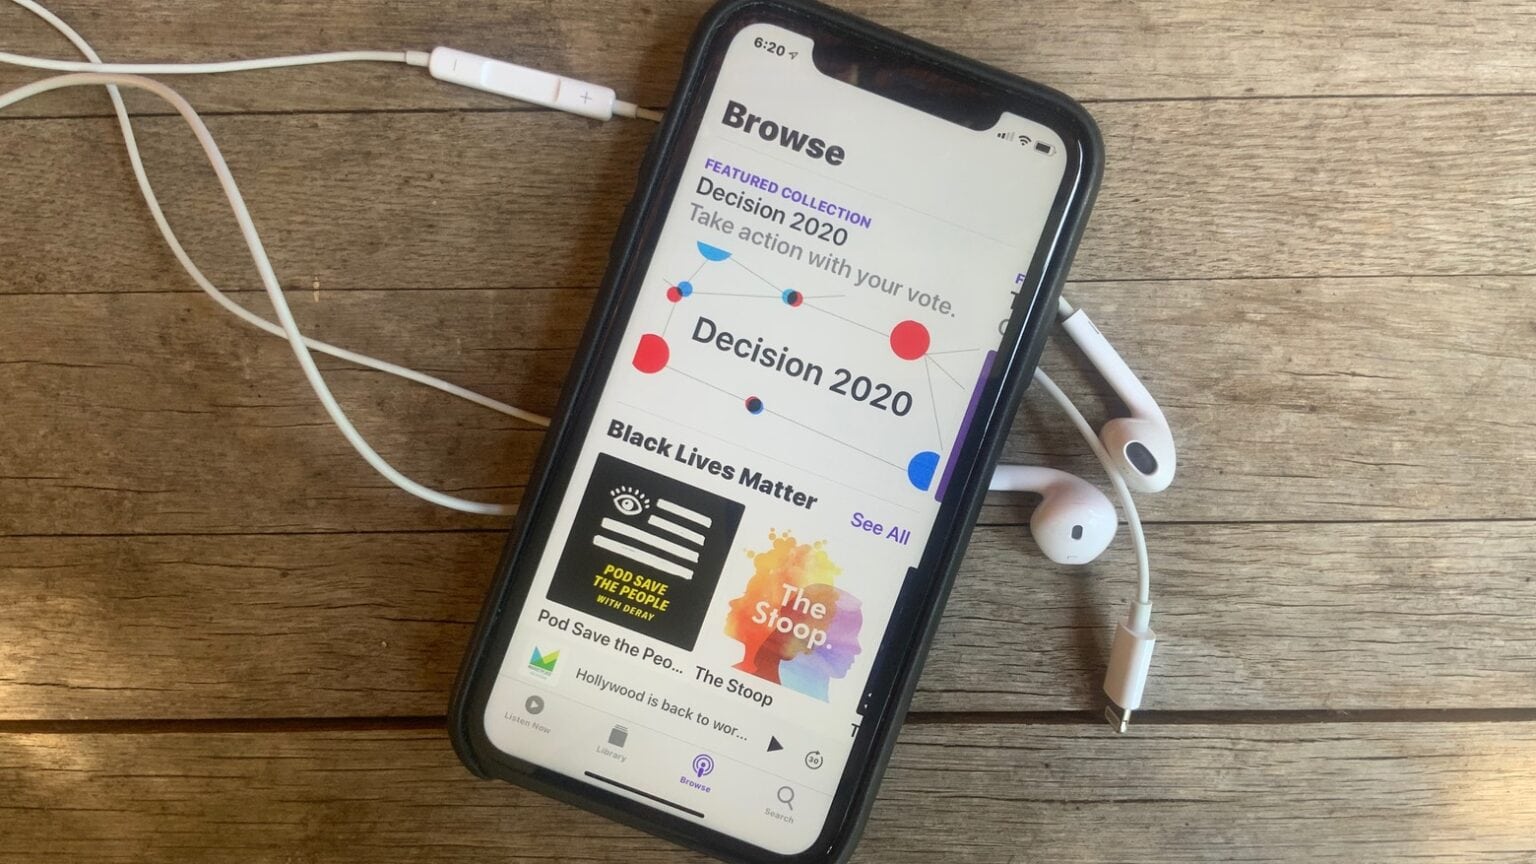 The Apple Podcasts app could be getting some new features in iOS 14.